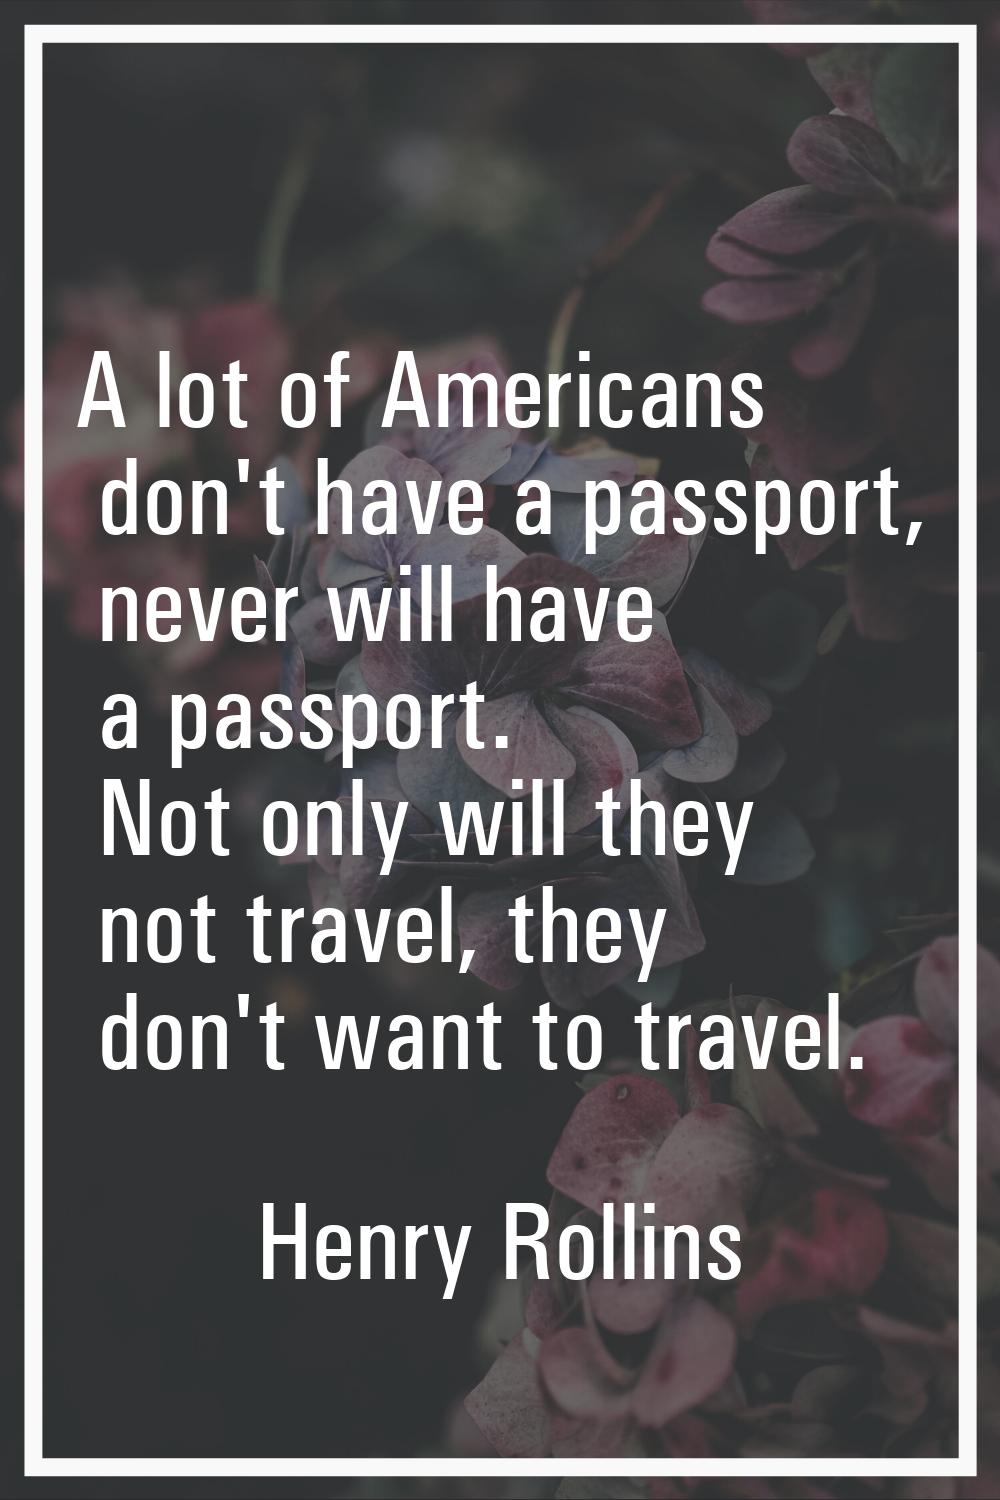 A lot of Americans don't have a passport, never will have a passport. Not only will they not travel